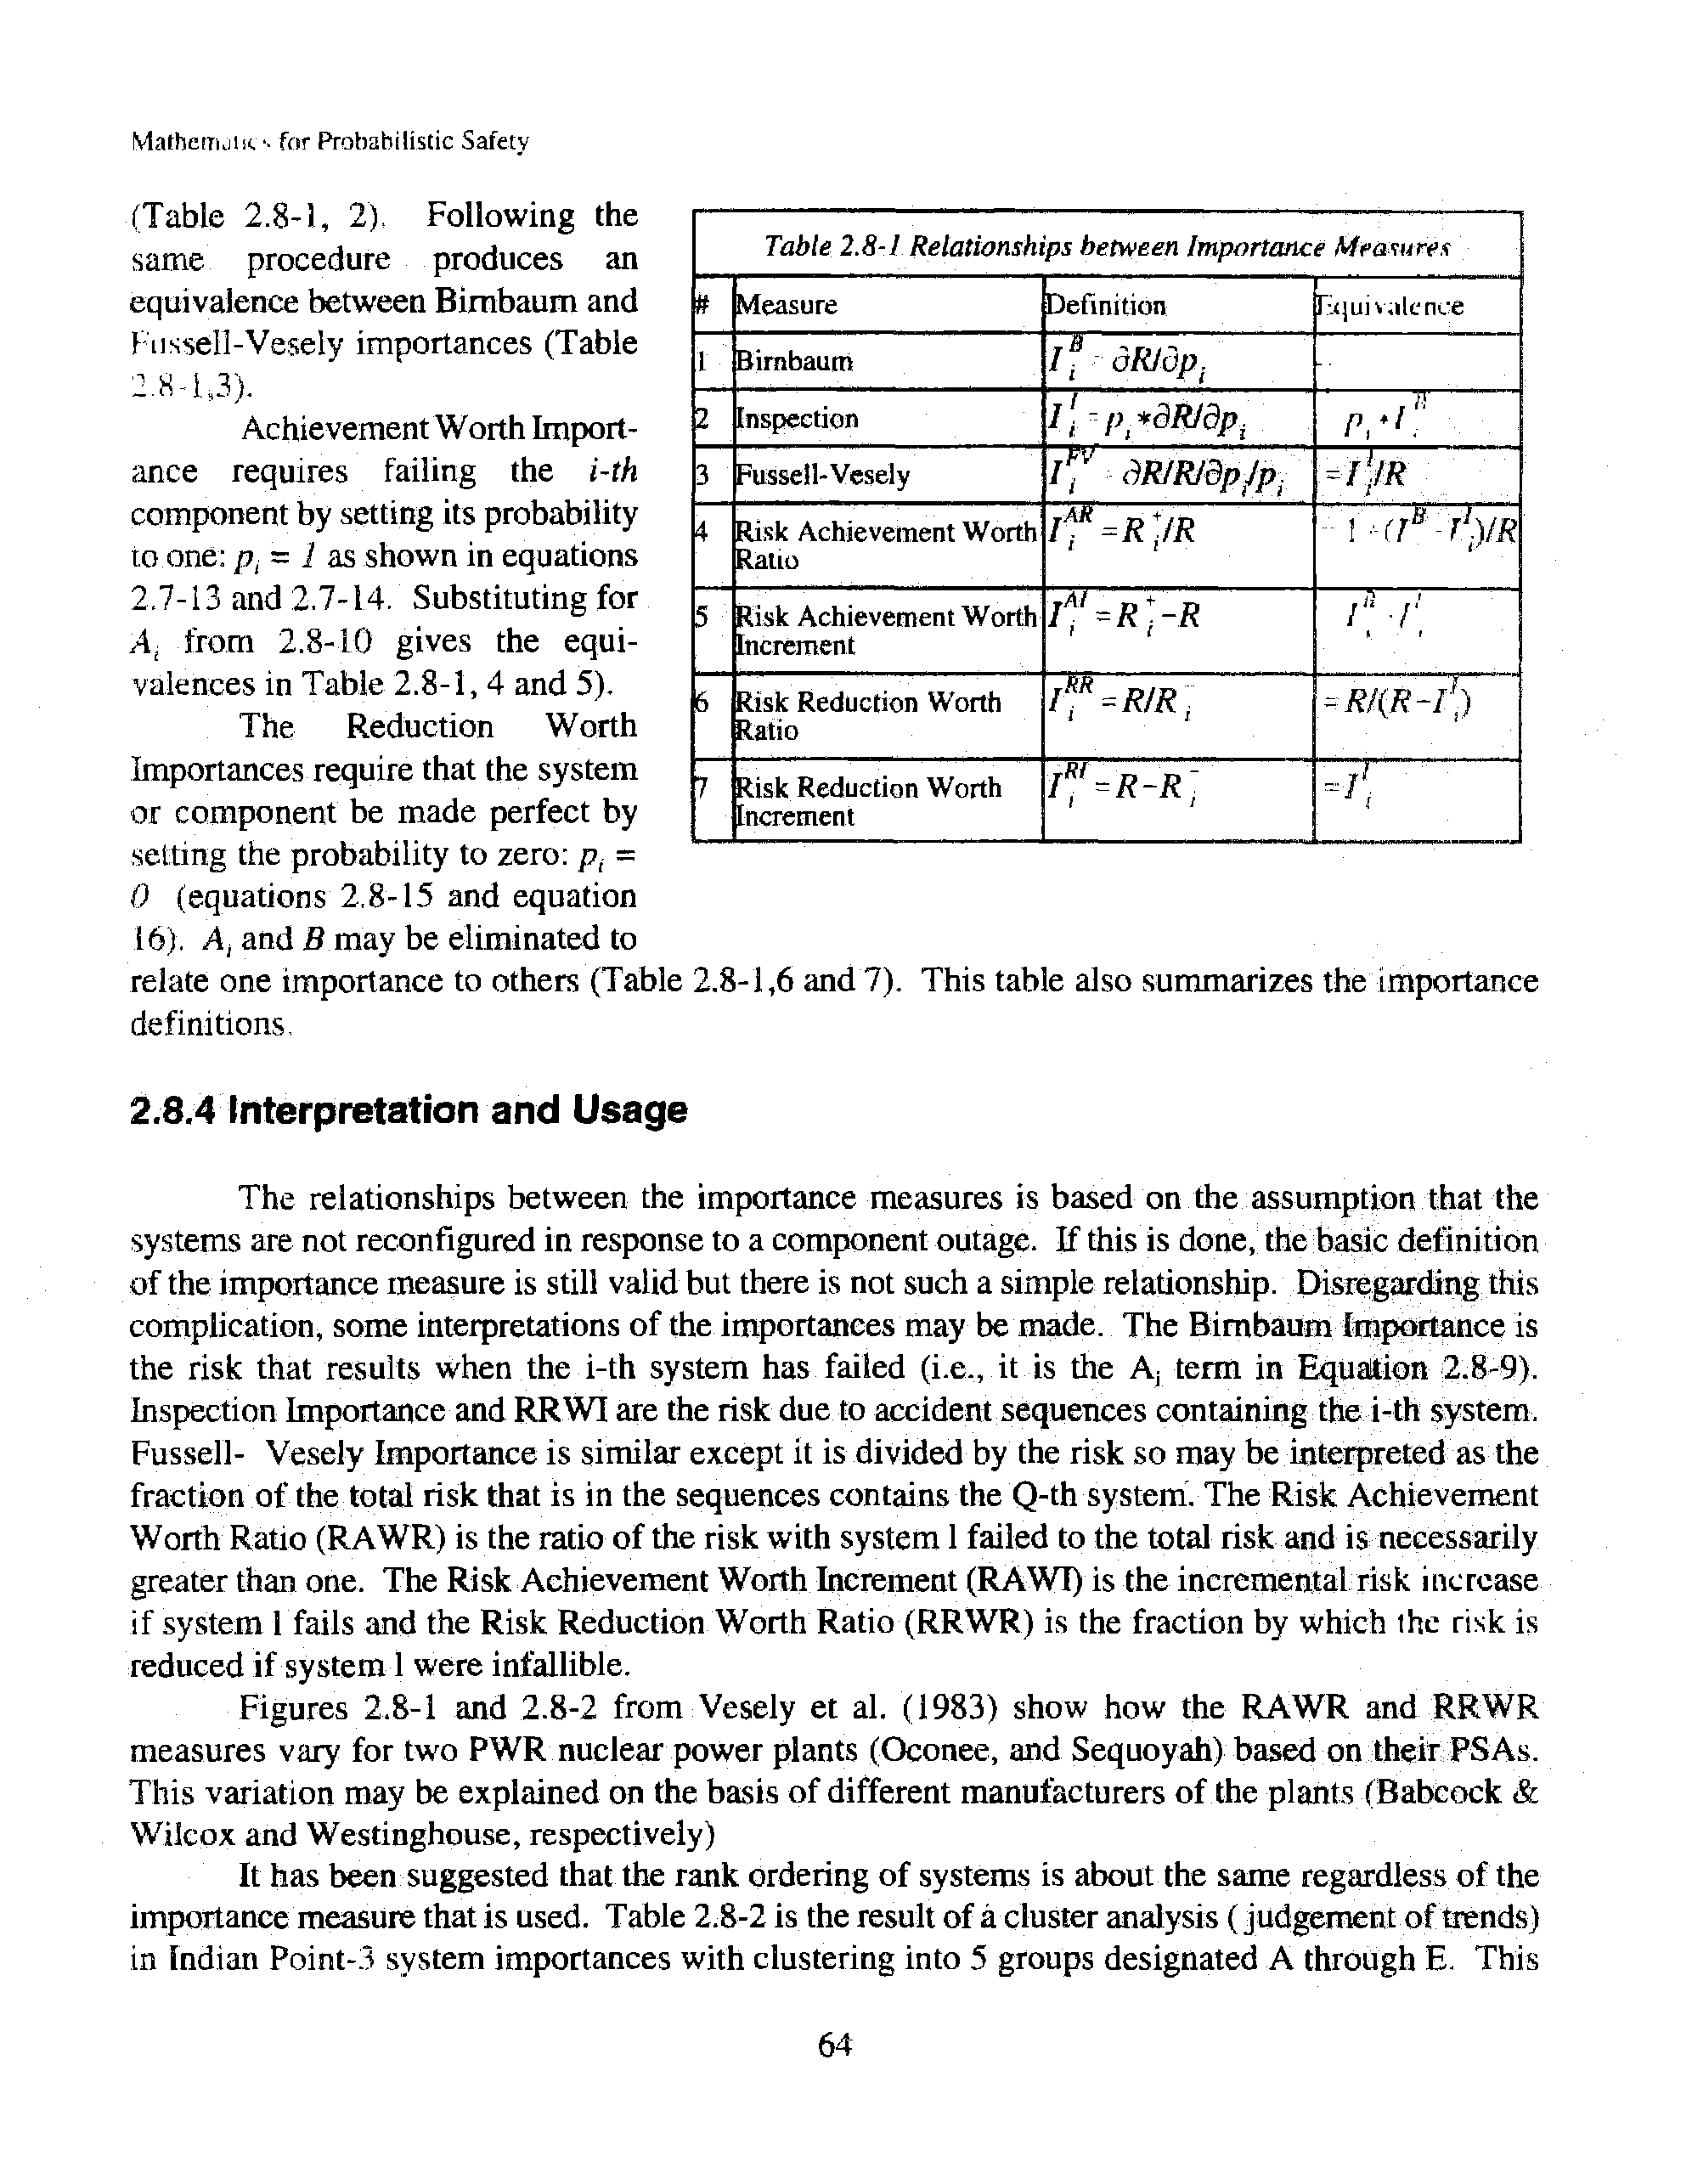 Figures 2.8-1 and 2.8-2 from Vesely et al. (1983) show how the RAWR and RRWR measures vary for two PWR nuclear power plants (Oconee, and Sequoyah) based on their PSAs. This variation may be explained on the basis of different manufacturers of the plants (Babcock Wilcox and Westinghouse, respectively)...